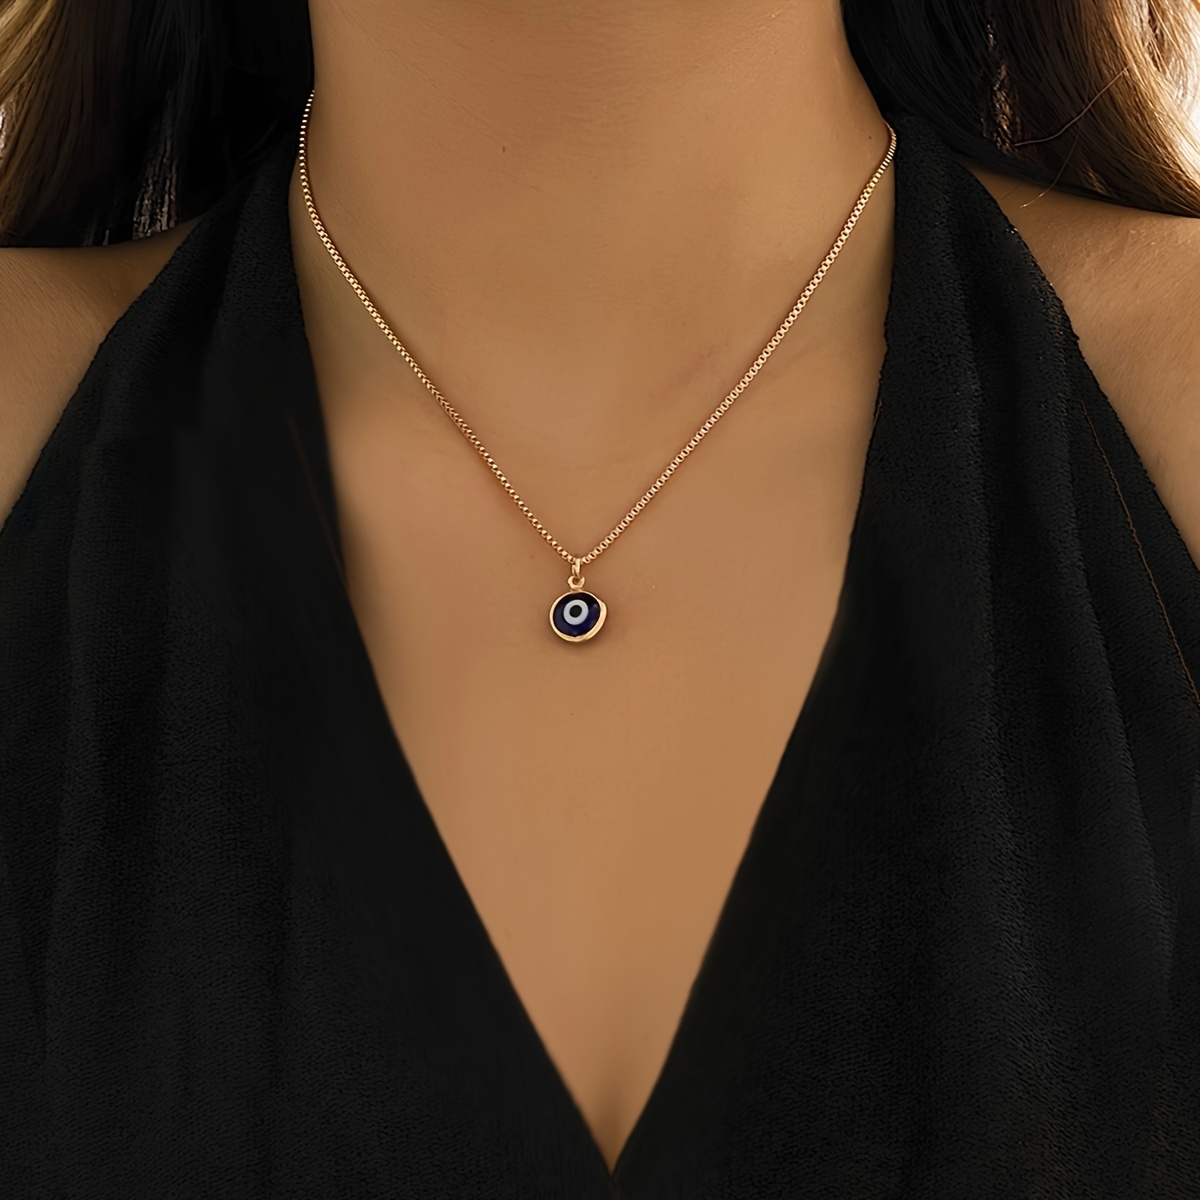 

Devil's Eye Shape Pendant Necklace 1 Pc Minimalist Alloy Neck Chain Jewelry Lucky Protection Jewelry Gift